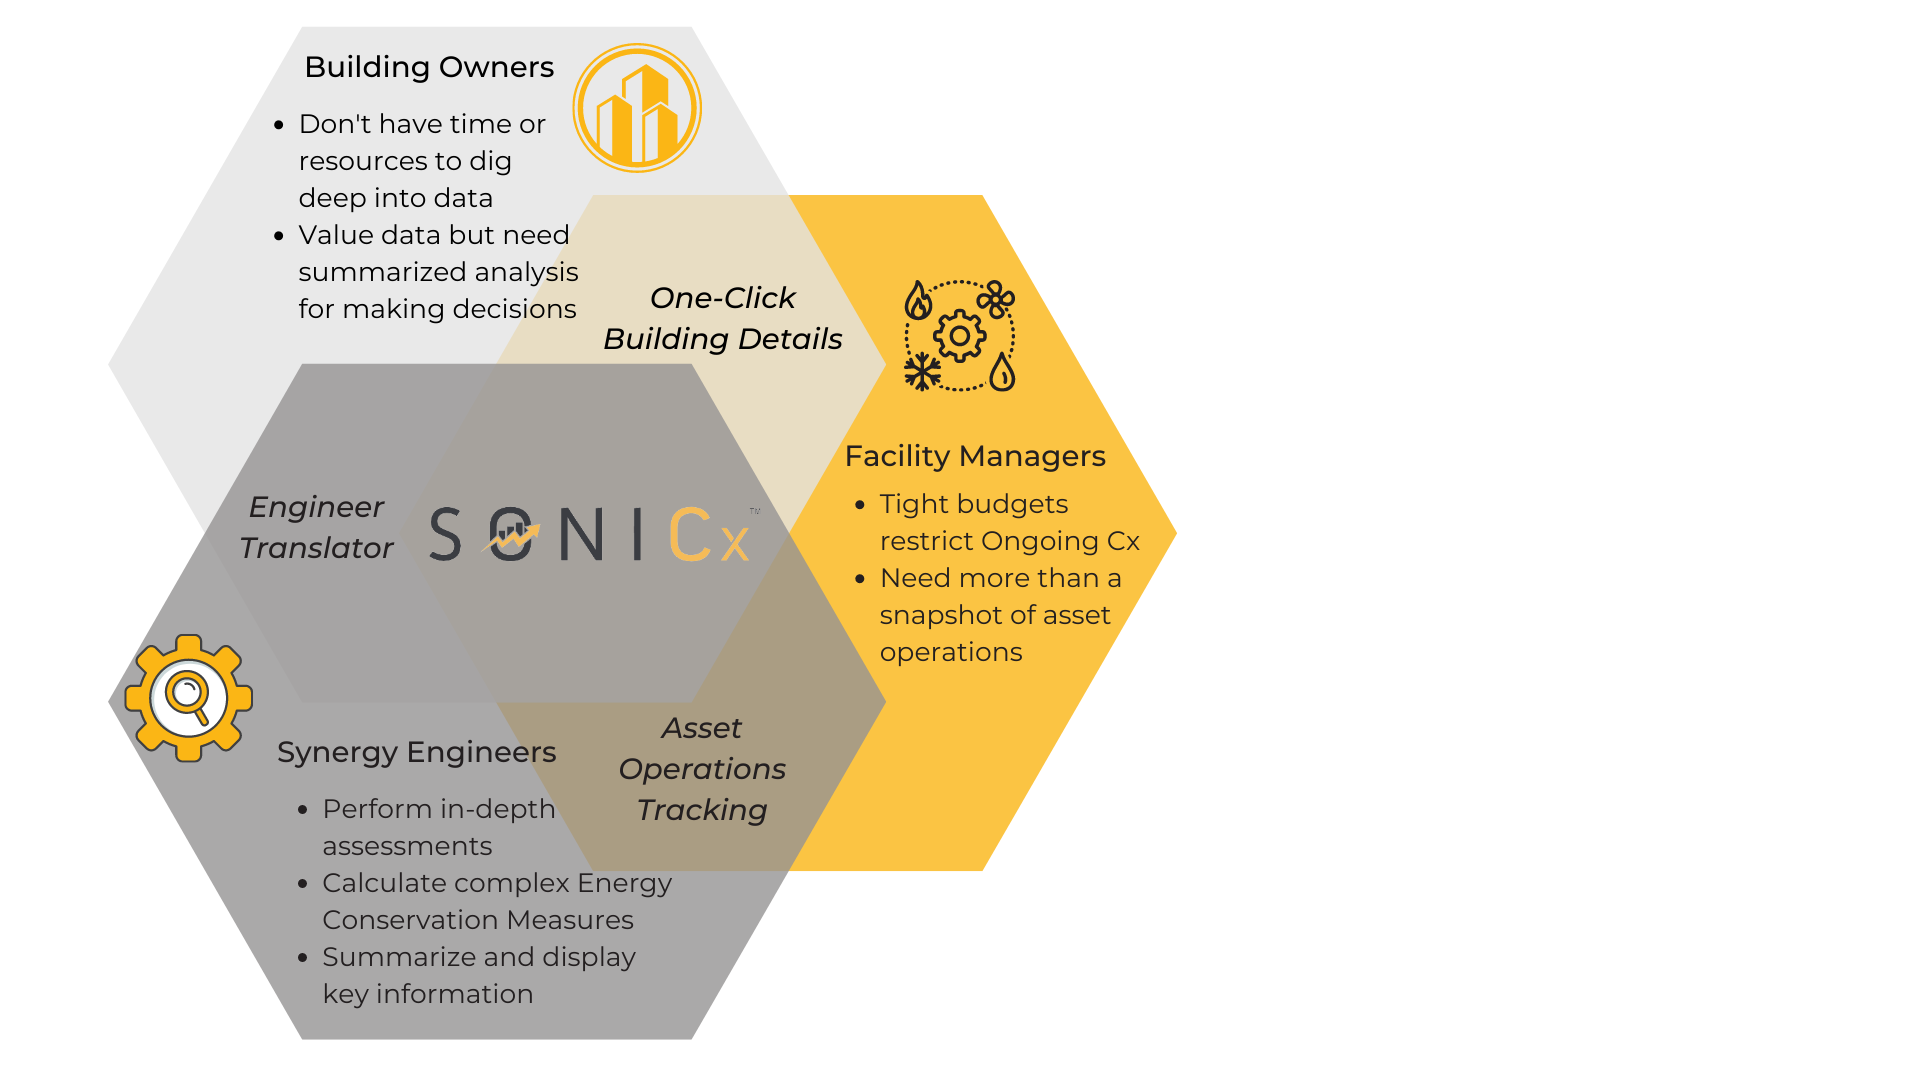 Building analytics to address issues proactively instead of reactively. SONICx - your engineer translator.